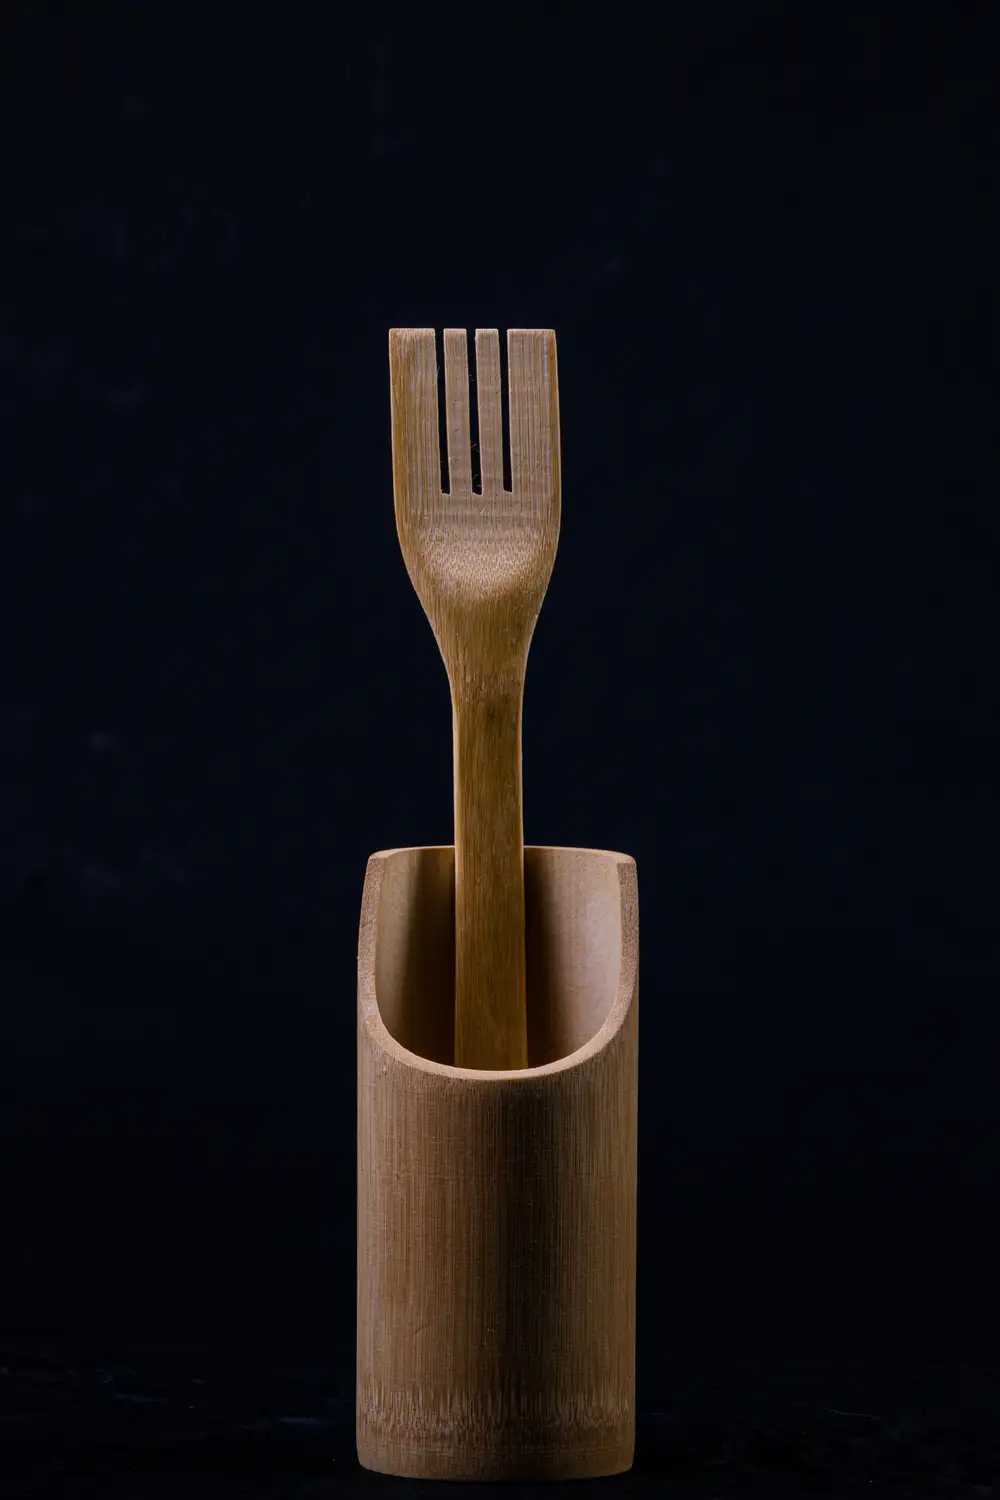 Wooden spoon in a conainer